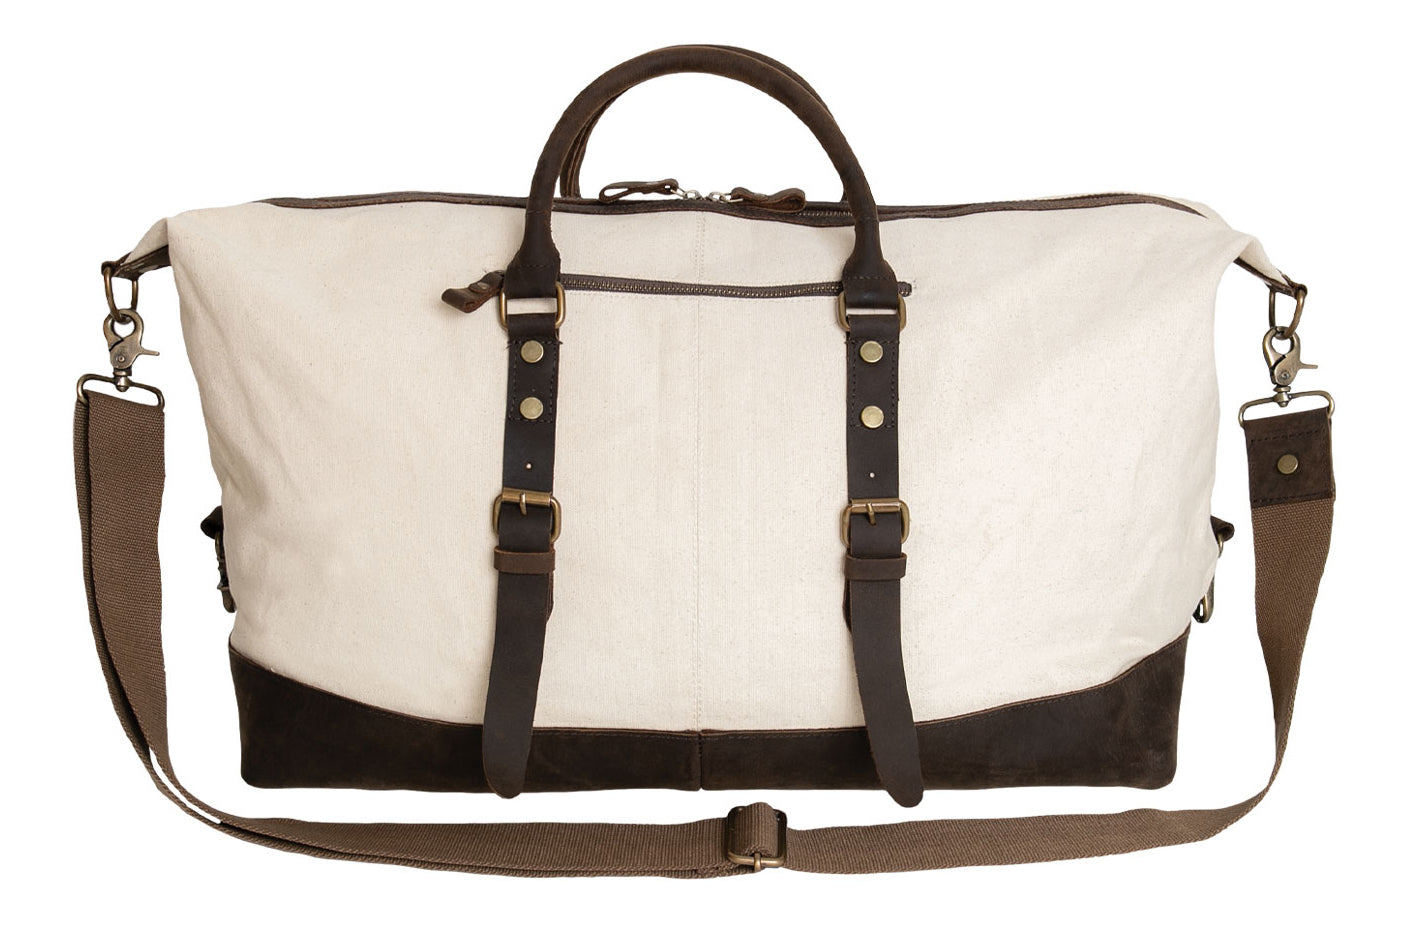 Rothco Extended Weekender Travel Bag